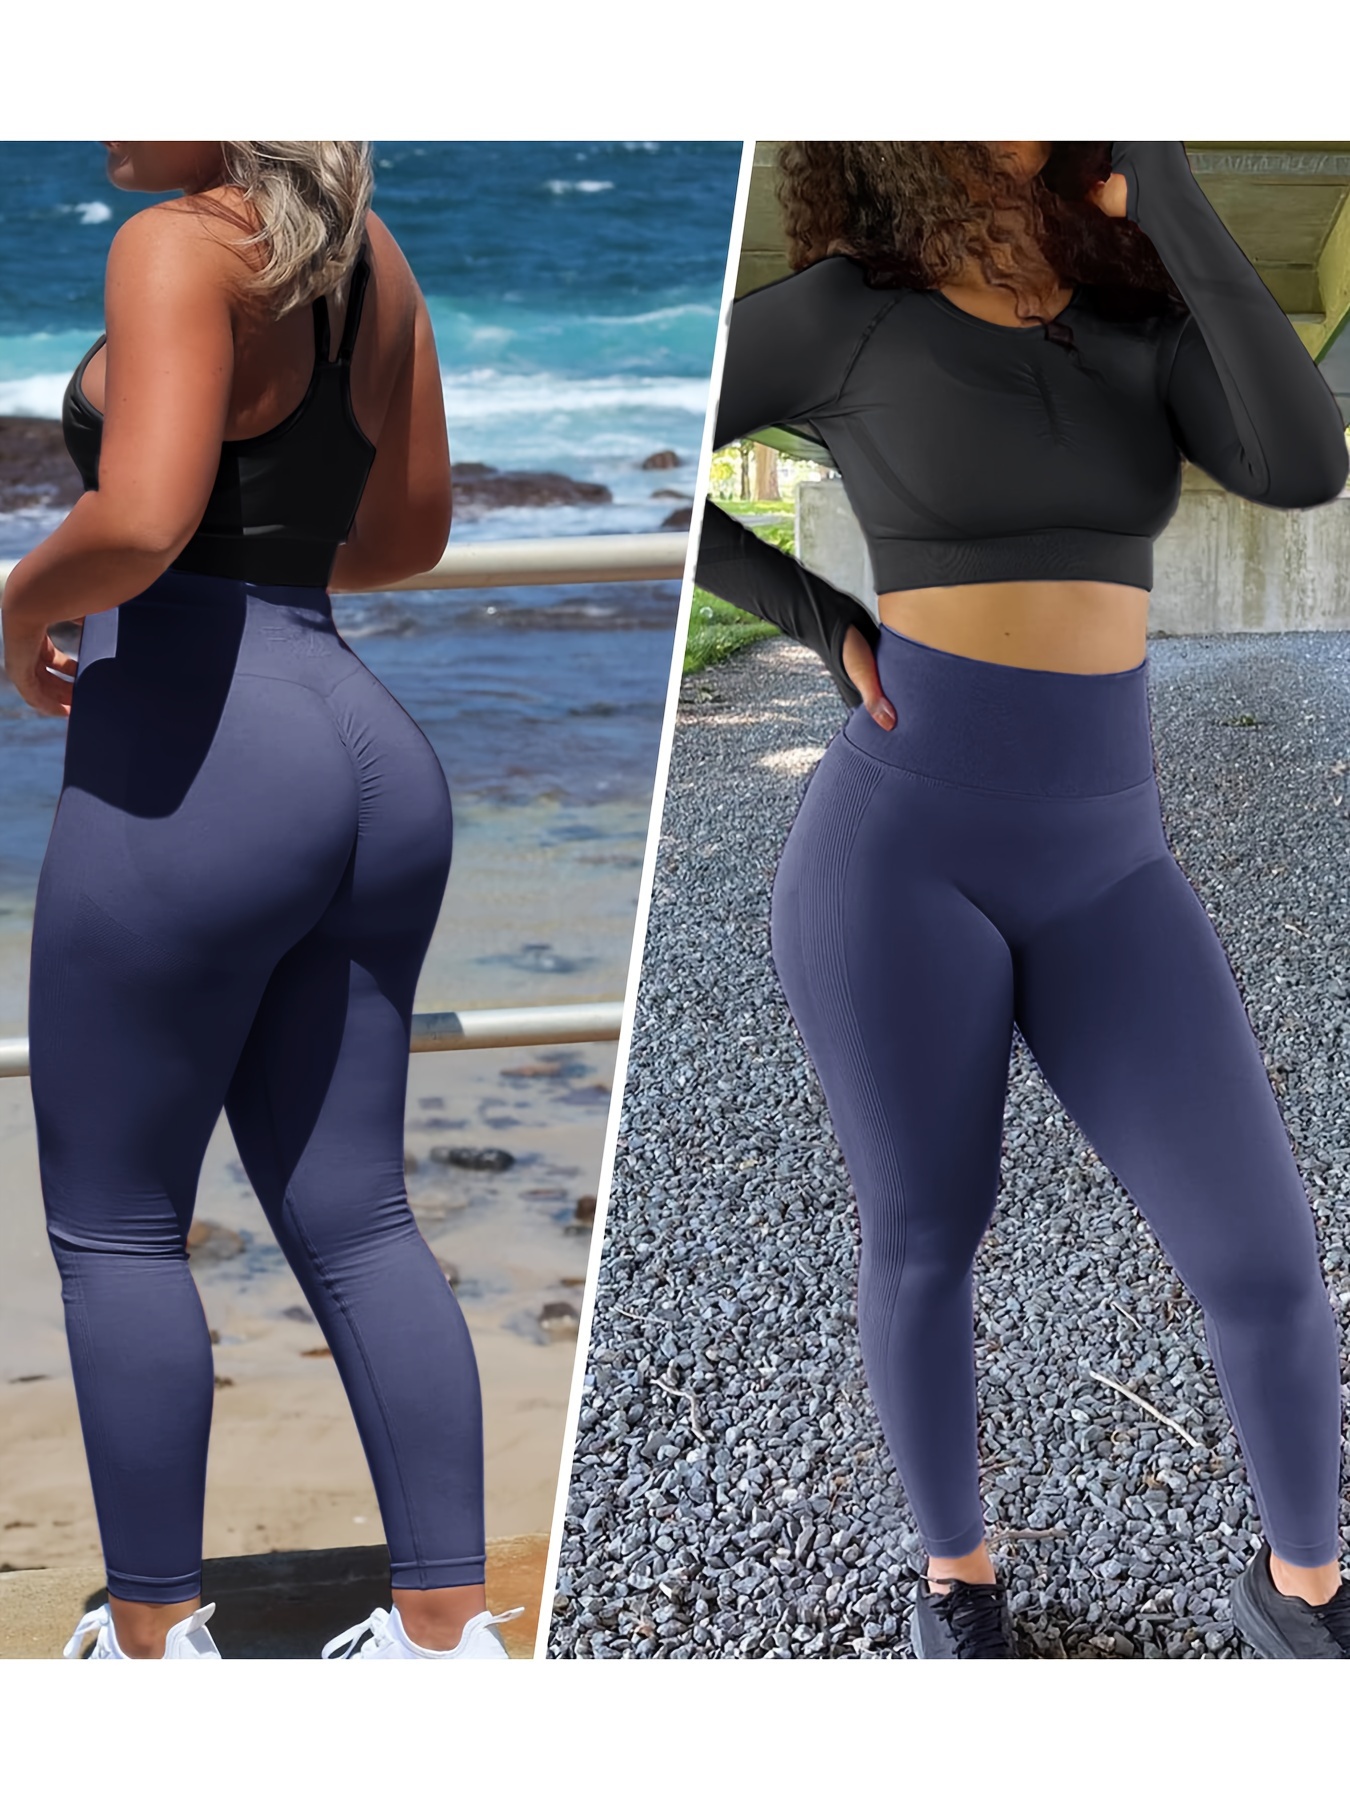 RUNNING GIRL Scrunch Butt Lifting Leggings for Women,High Waisted Seamless  Workout Leggings Gym Tights Tummy Control Pants